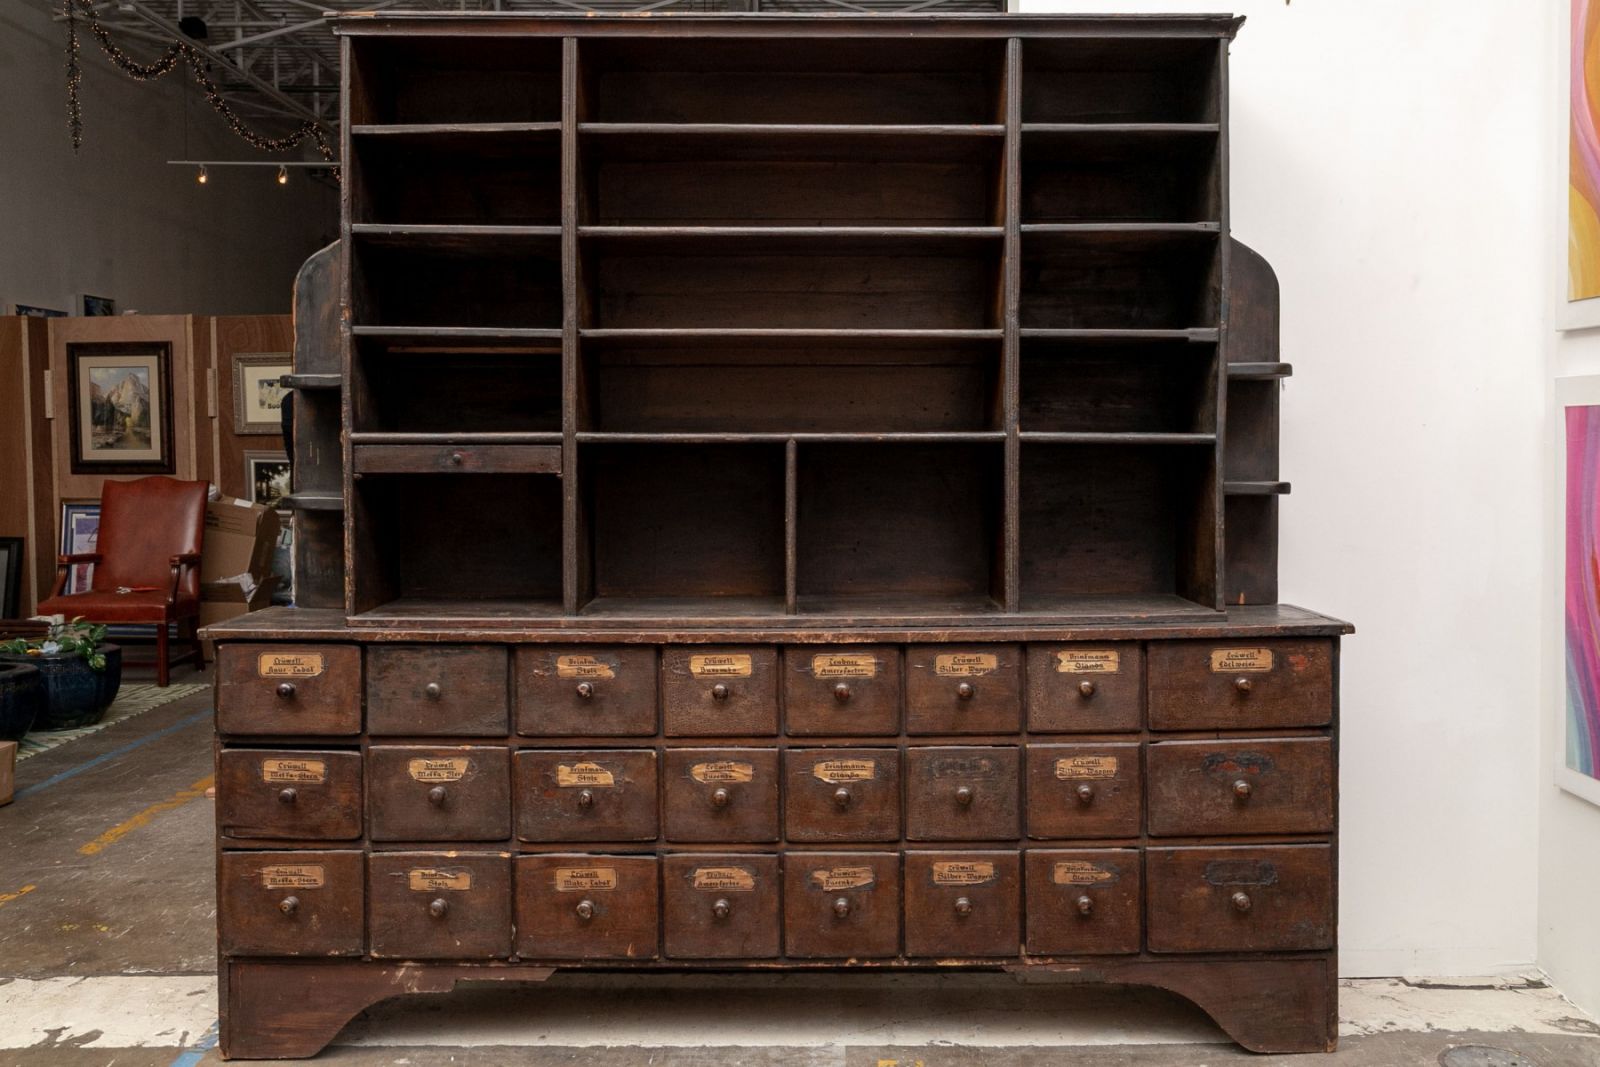 EXTRAORDINARY 19TH CENTURY APOTHECARY CABINET FROM TEXAS HILL COUNTRY STORE